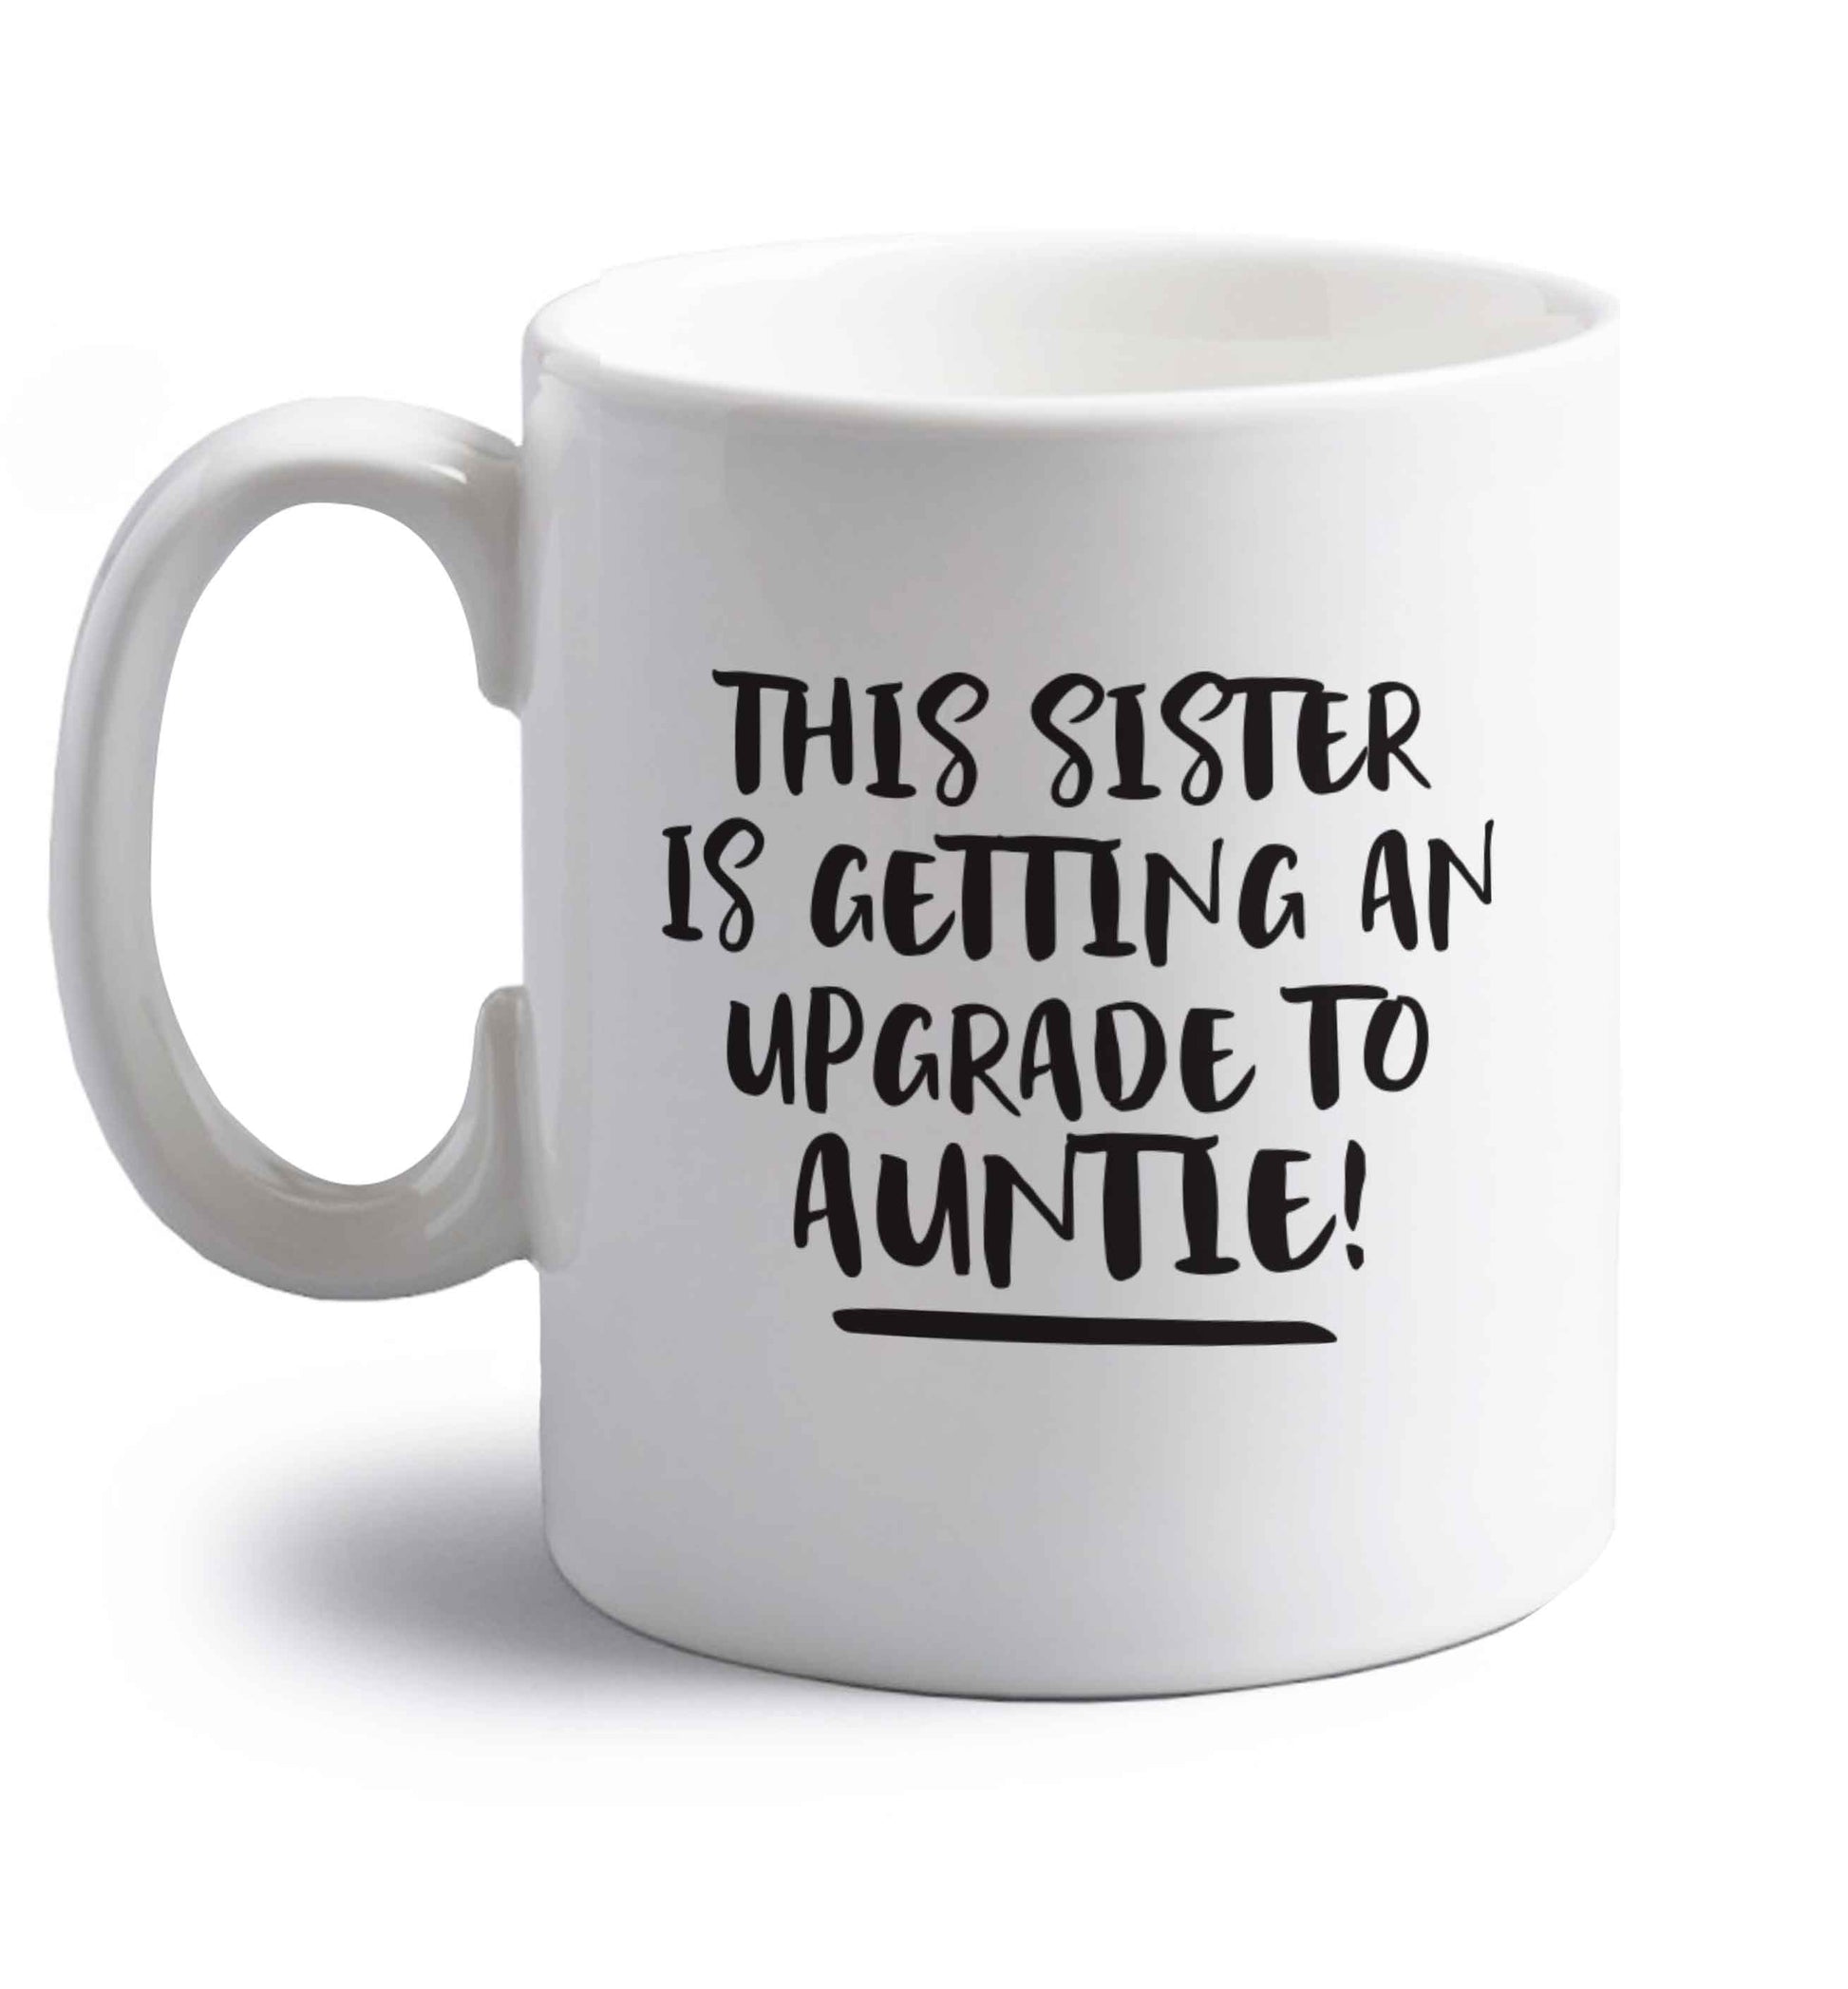 This sister is getting an upgrade to auntie! right handed white ceramic mug 